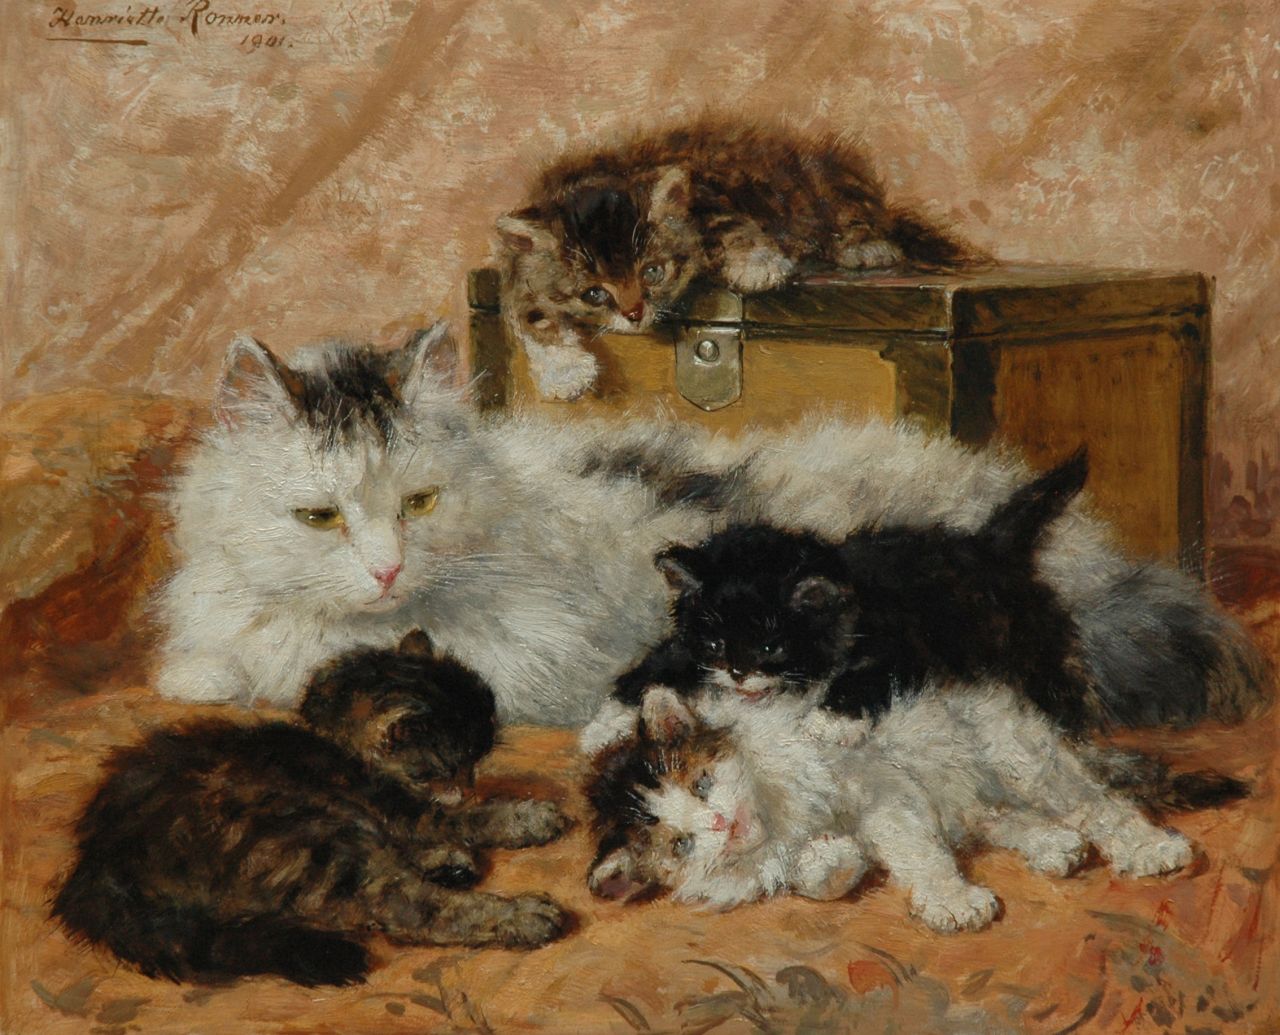 Ronner-Knip H.  | Henriette Ronner-Knip, The happy mother, Öl auf Holz 37,5 x 46,0 cm, signed u.l. und dated 1901